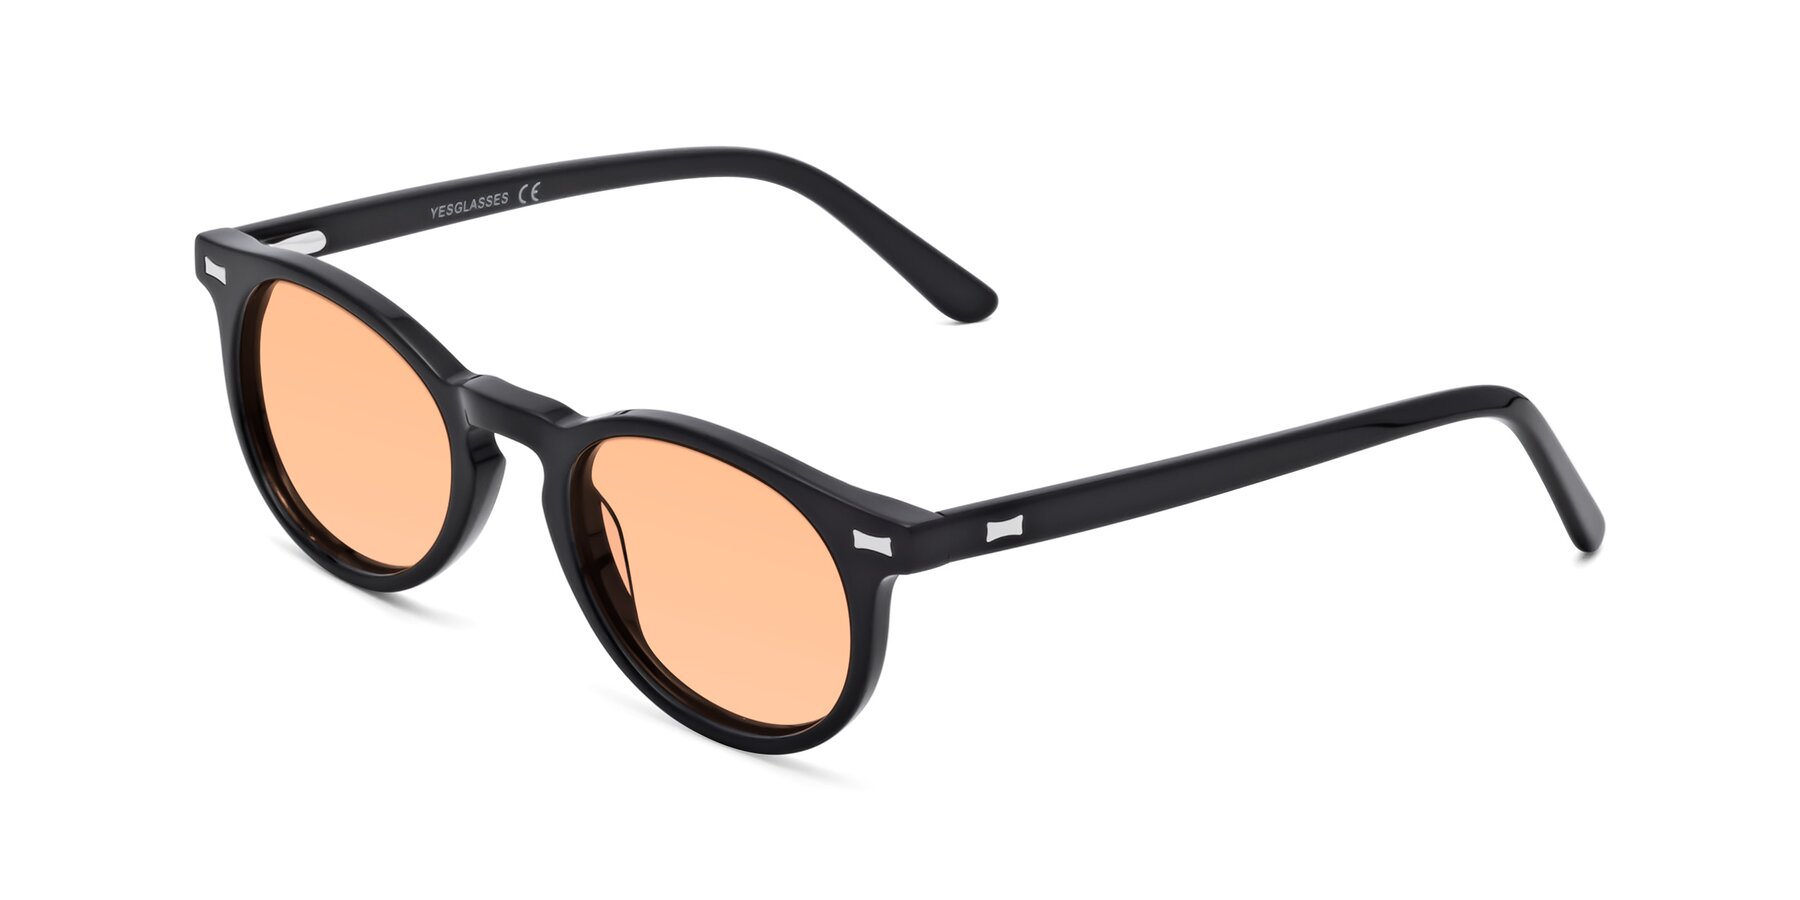 Angle of 17330 in Black with Light Orange Tinted Lenses